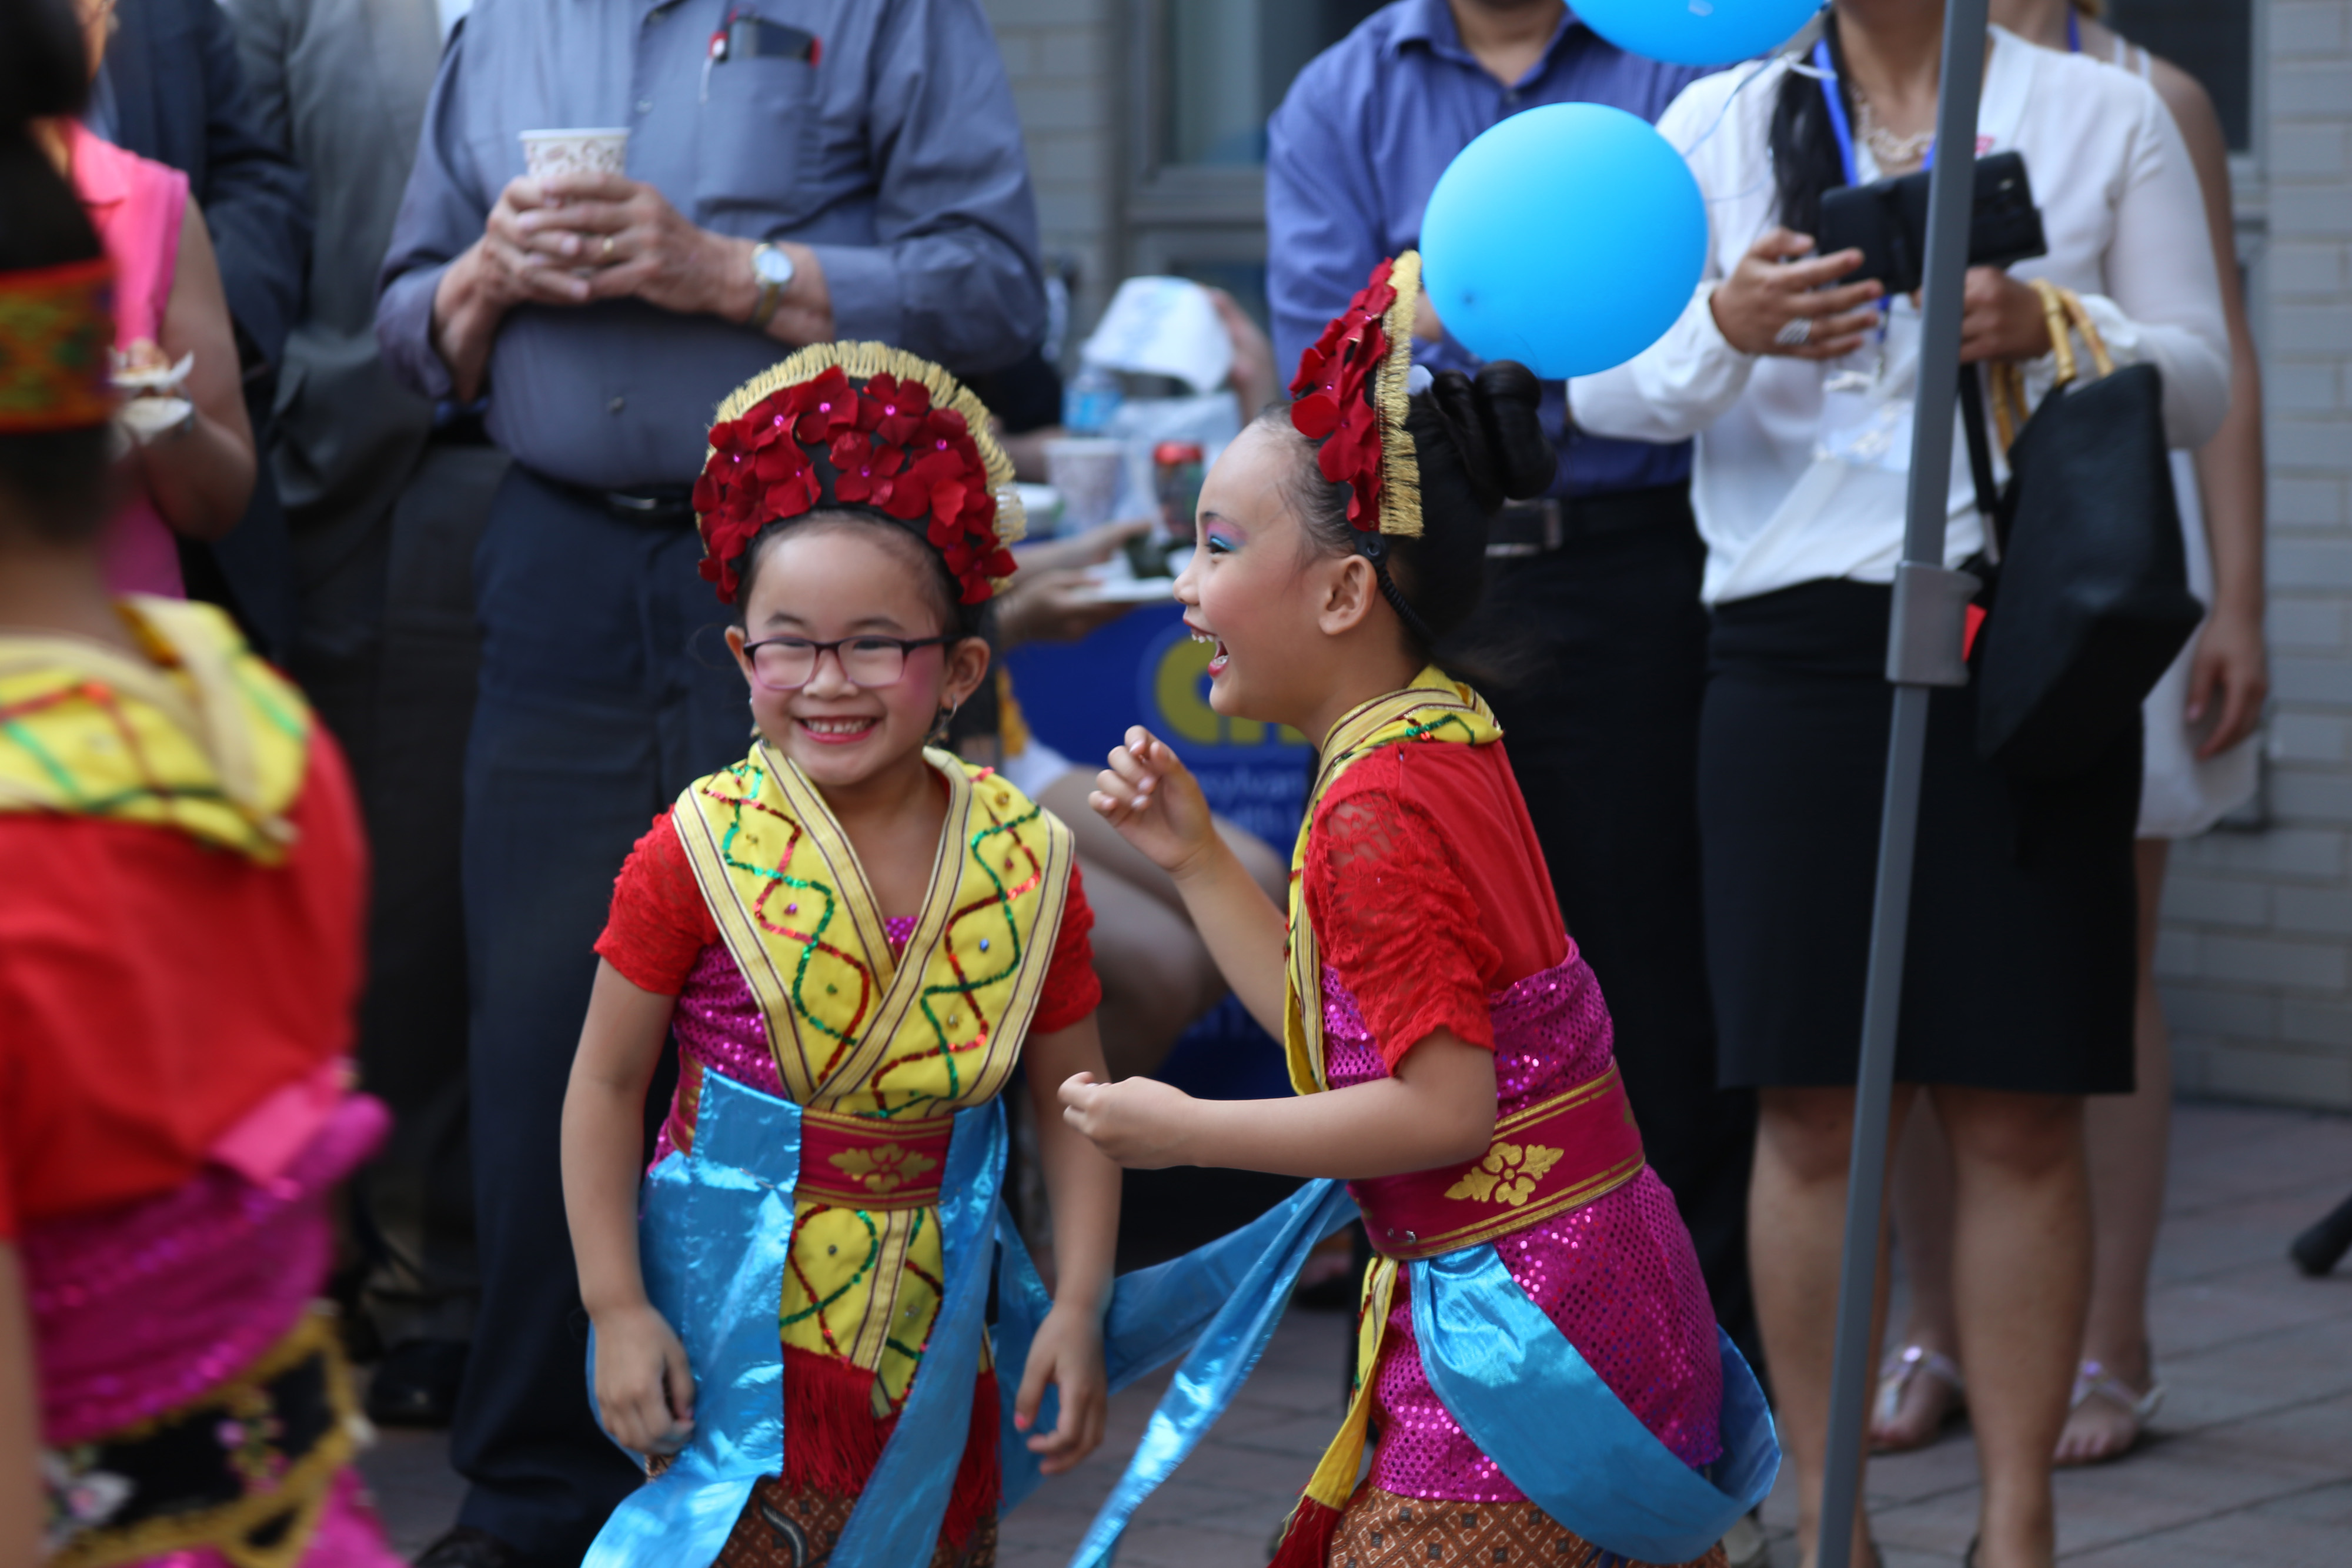 Two little girls share a moment during an Immigrant Heritage Month even in June 2016 in South Philadelphia.